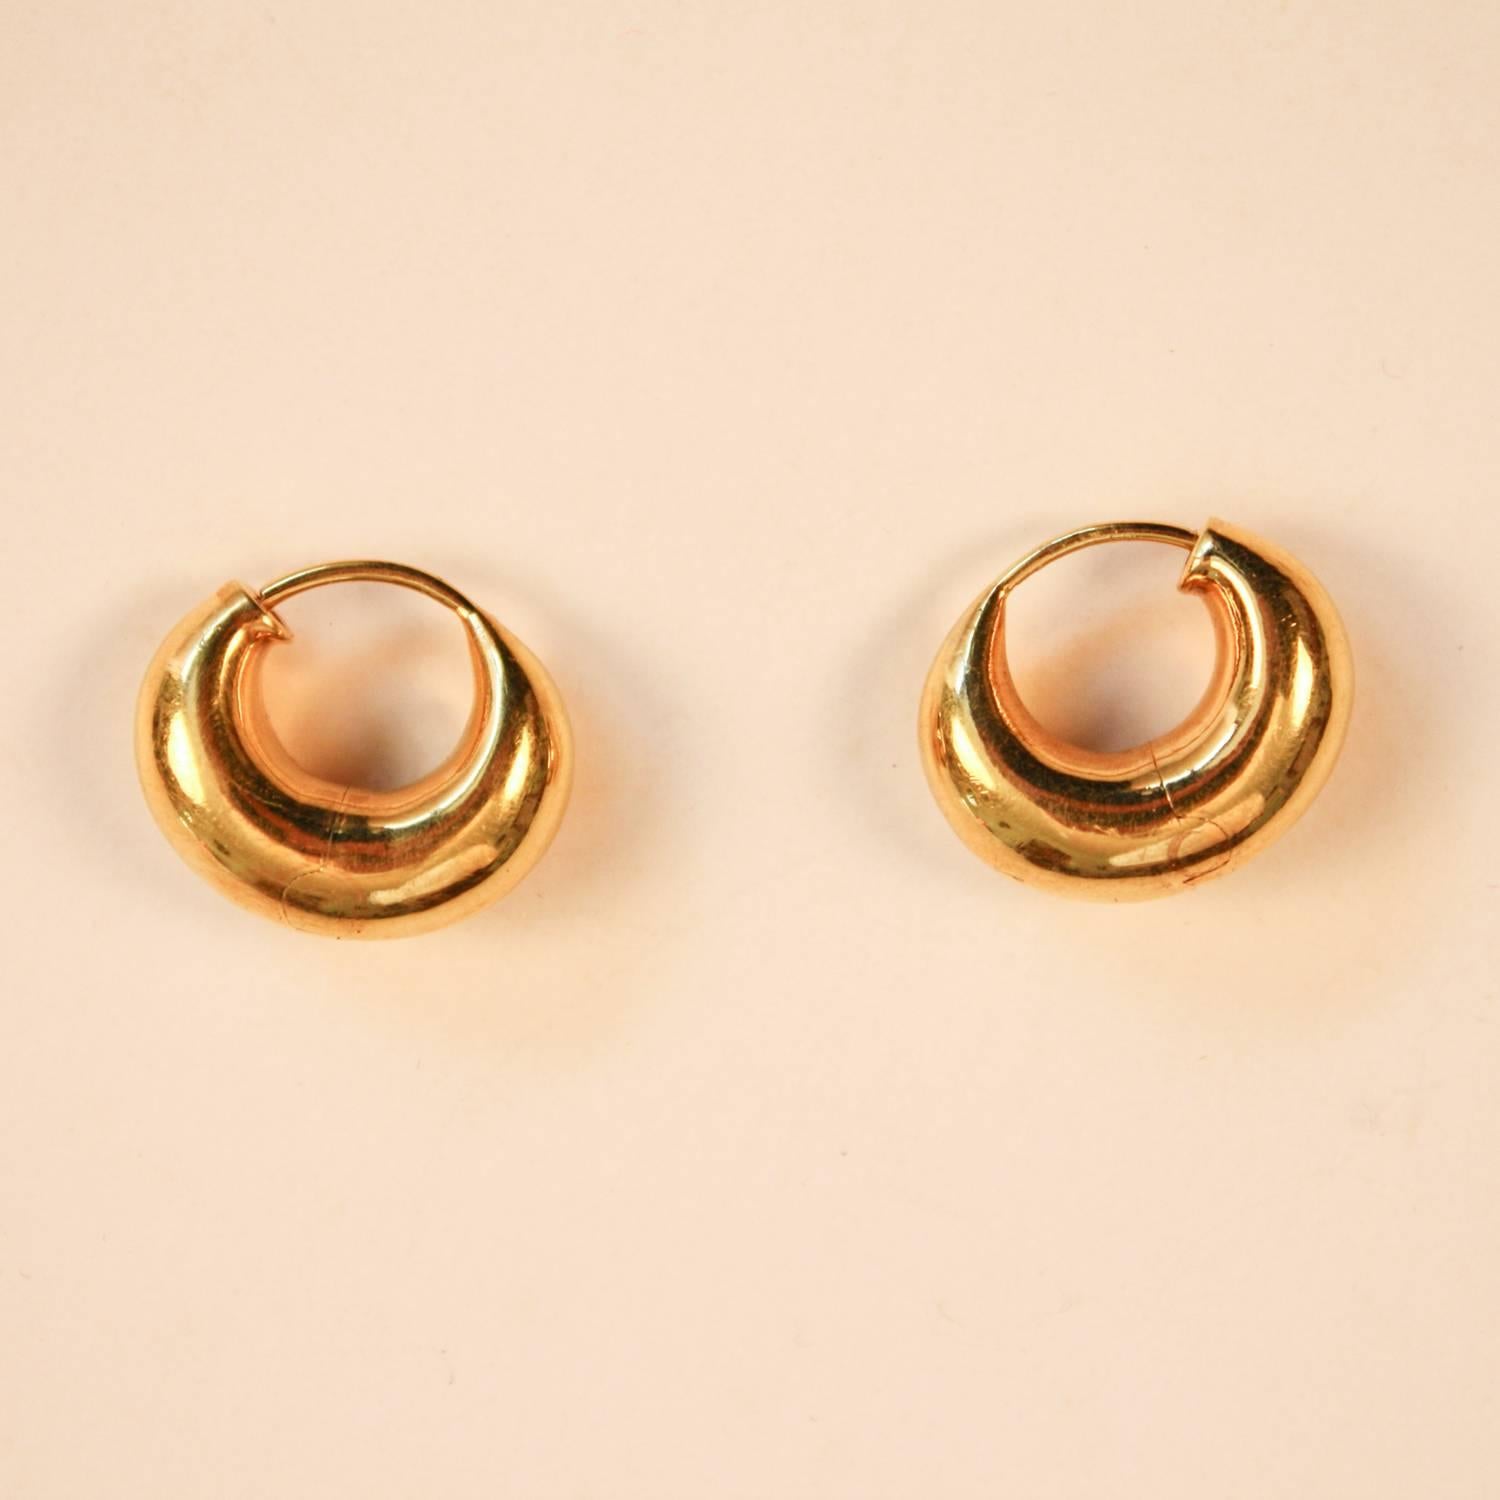 A beautifully designed pair of 18-karat yellow gold, hollow, hinged, hoop earrings. These cashew-shaped hoops are modestly sized and easy to wear. Each earring weighs 3g.
Diameter: .75